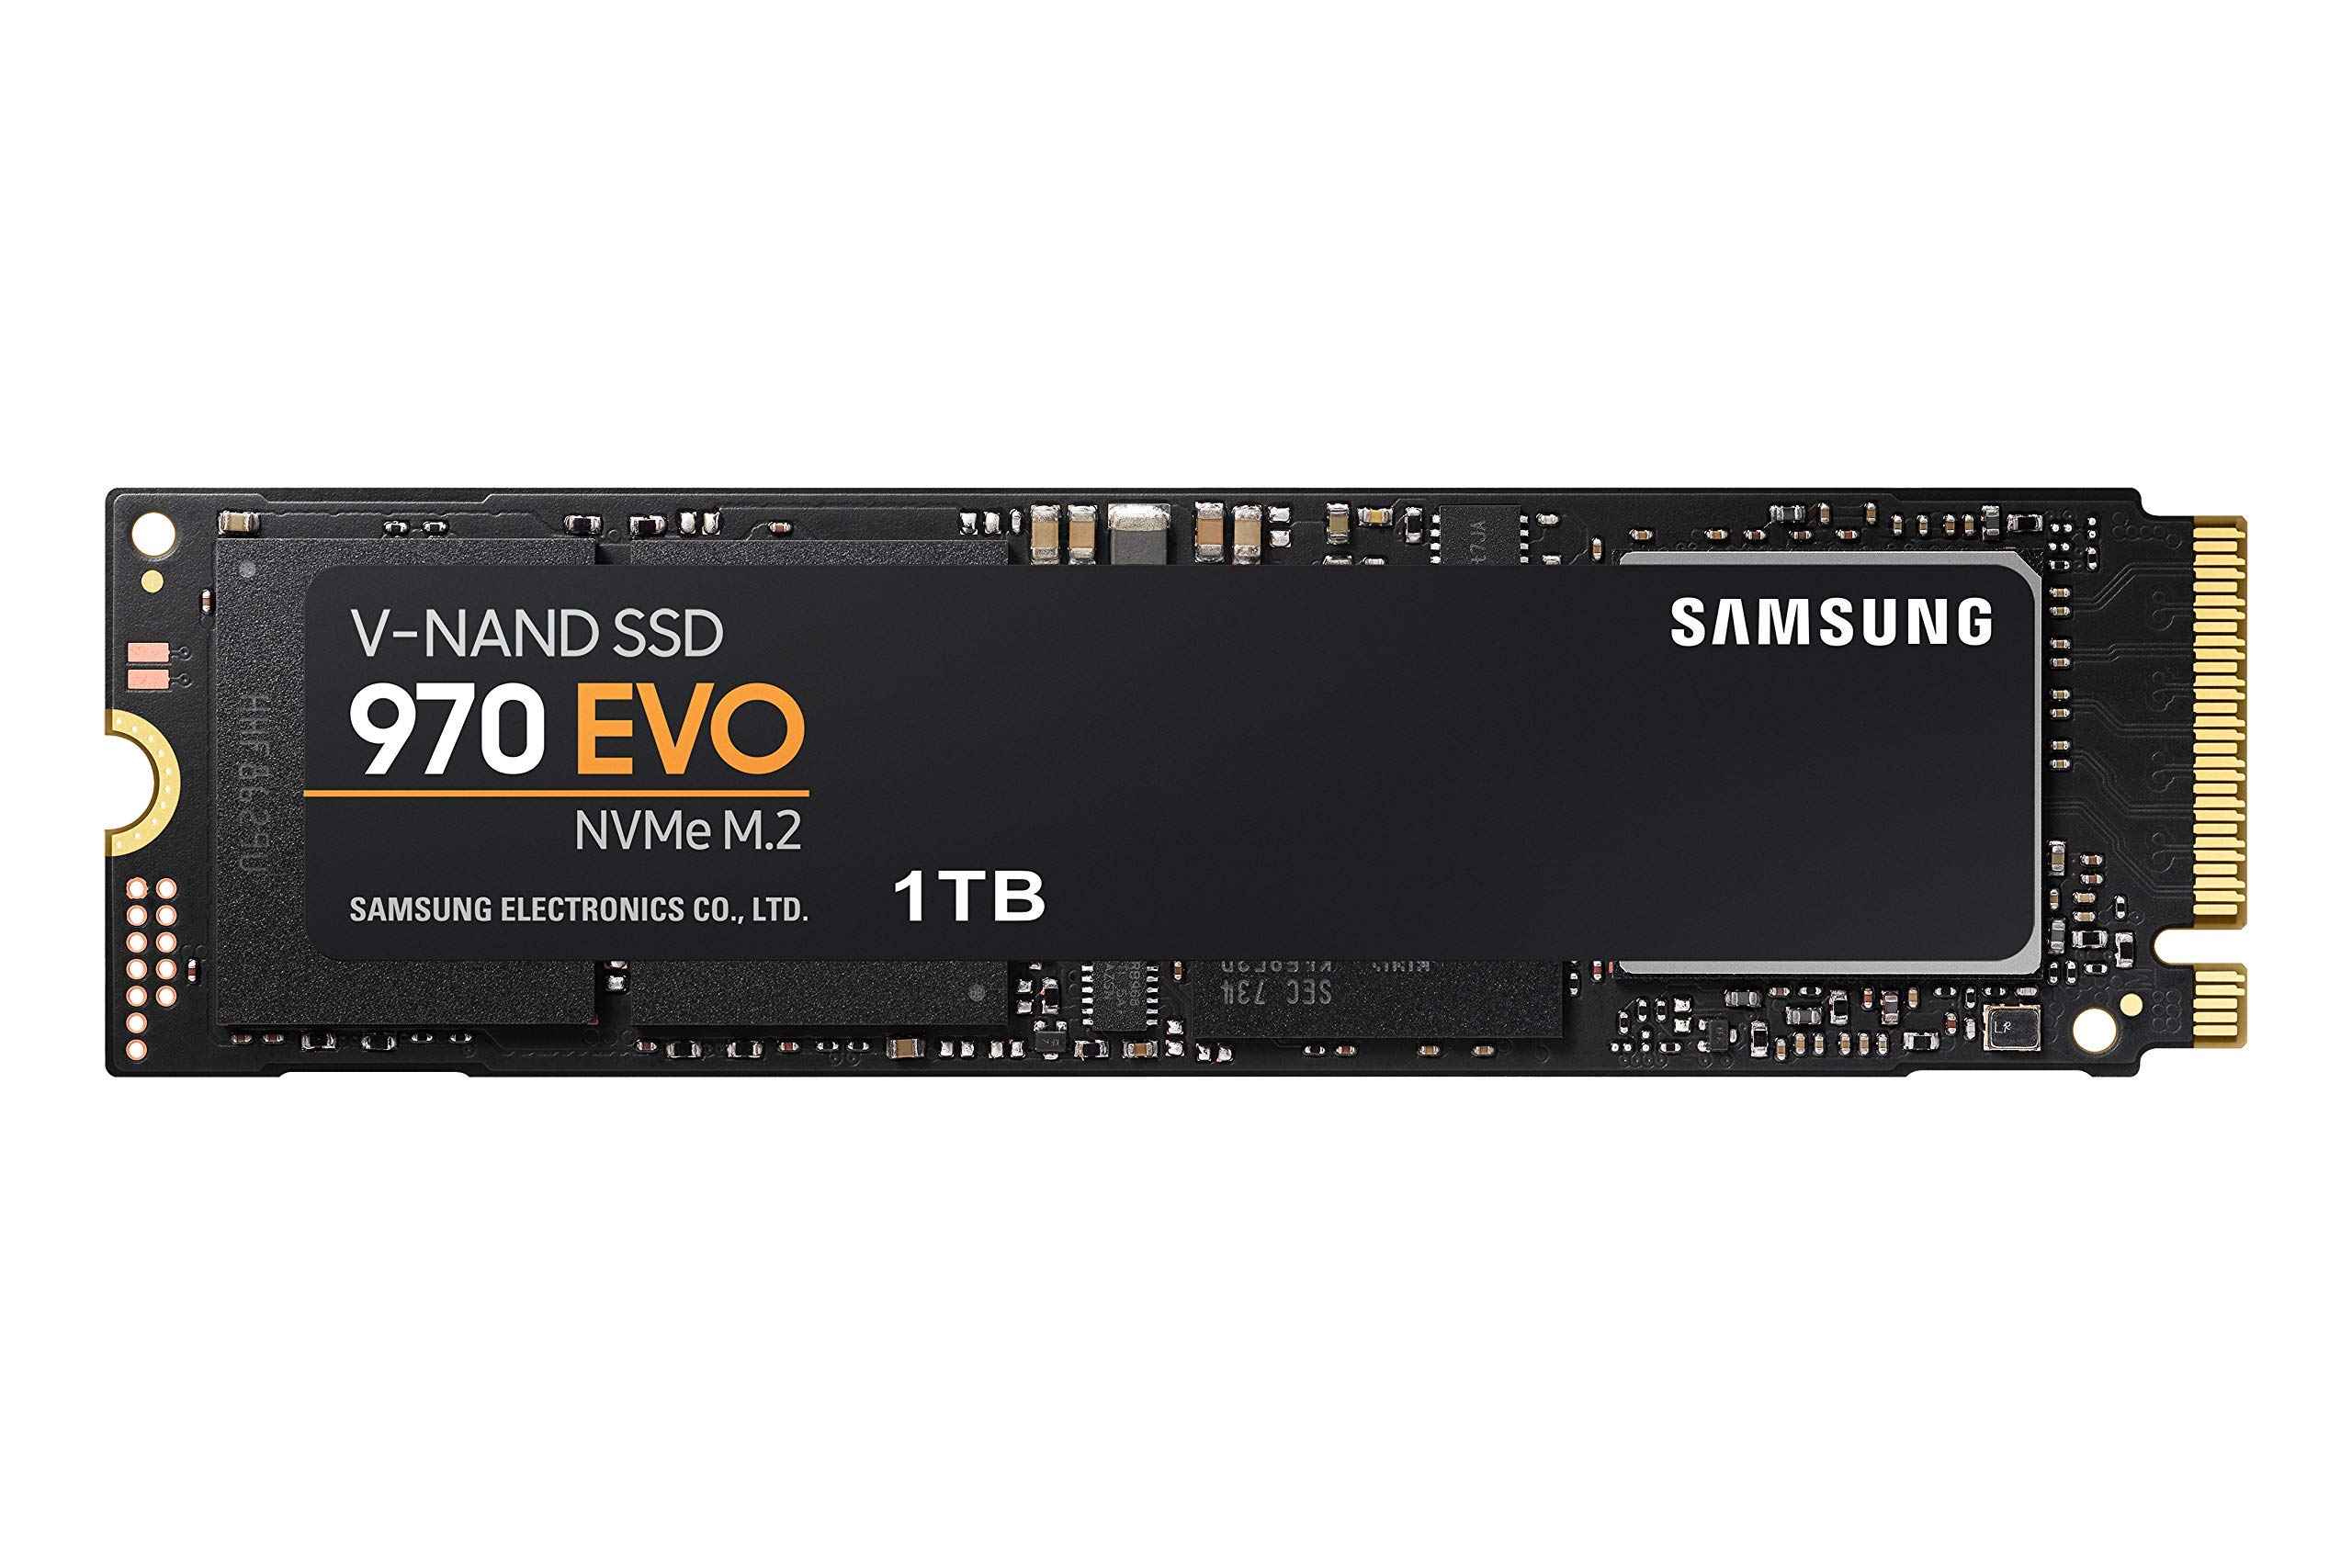 SAMSUNG 970 EVO SSD 1TB - M.2 NVMe Interface Internal Solid State Drive + 2mo Adobe CC Photography with V-NAND Technology (MZ-V7E1T0BW), Black/Red